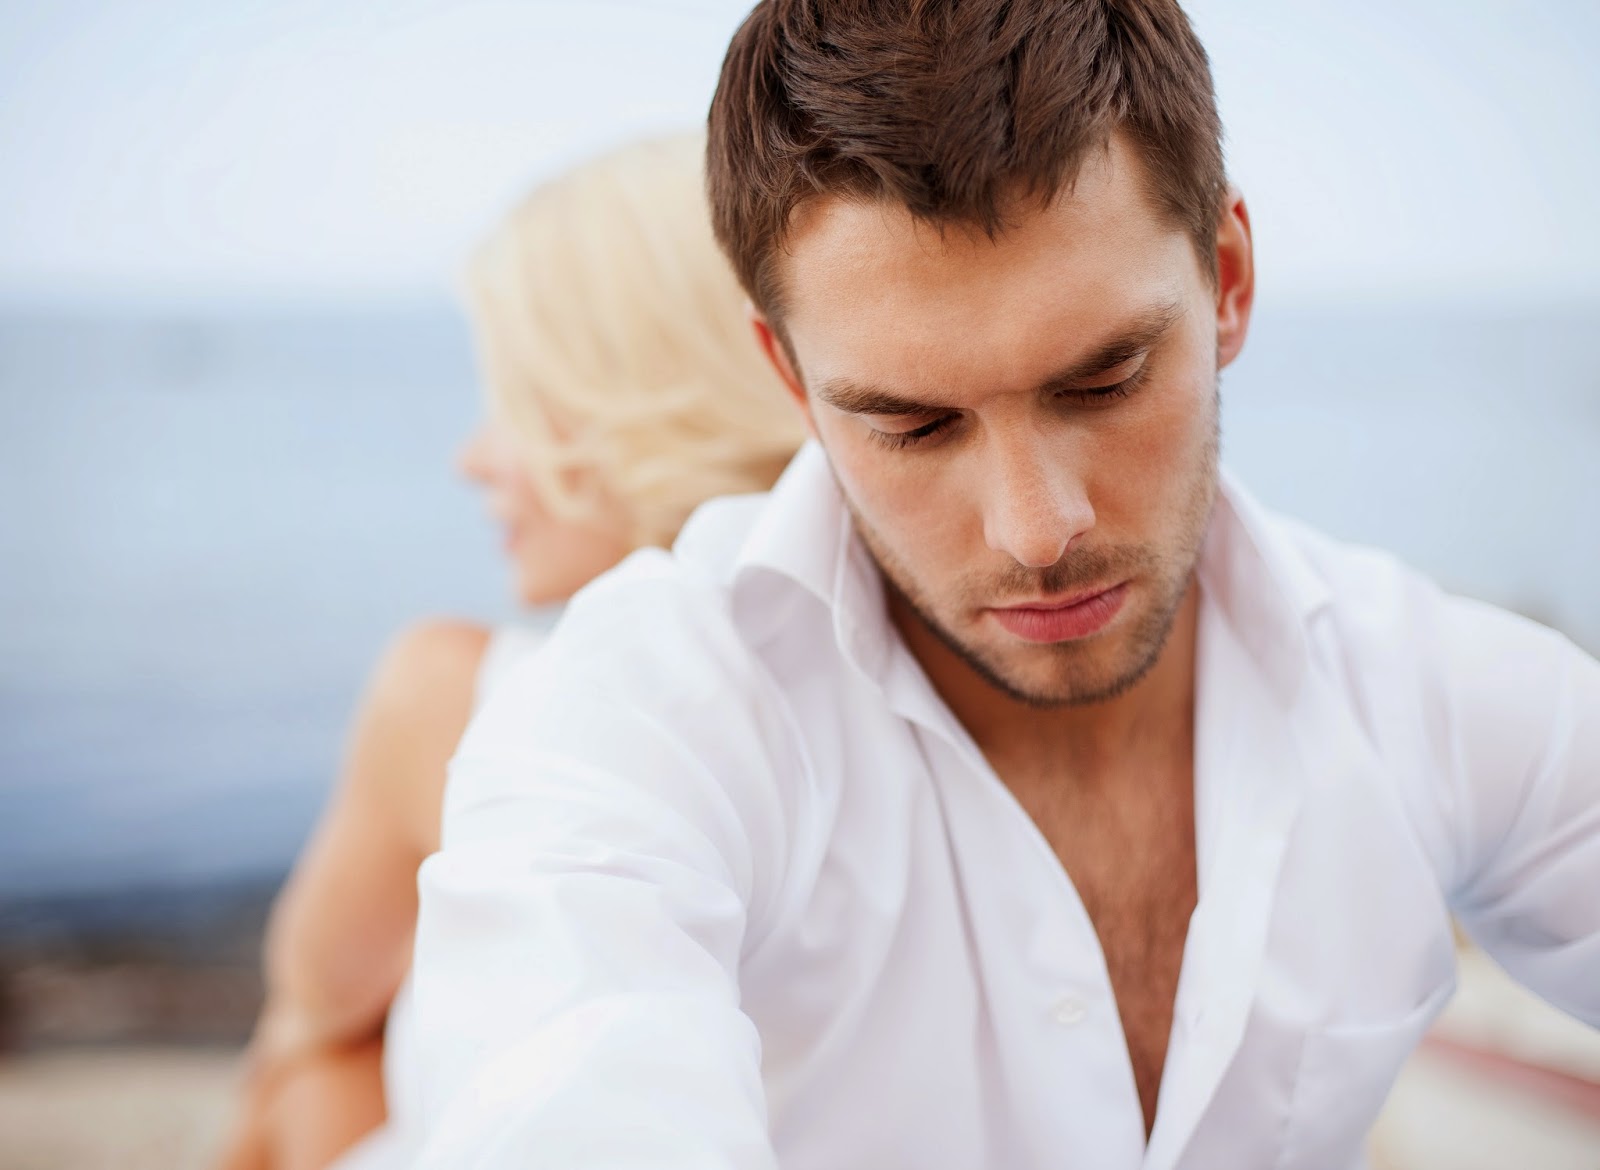 What To Do When Your Husband Is Not Affectionate Towards You